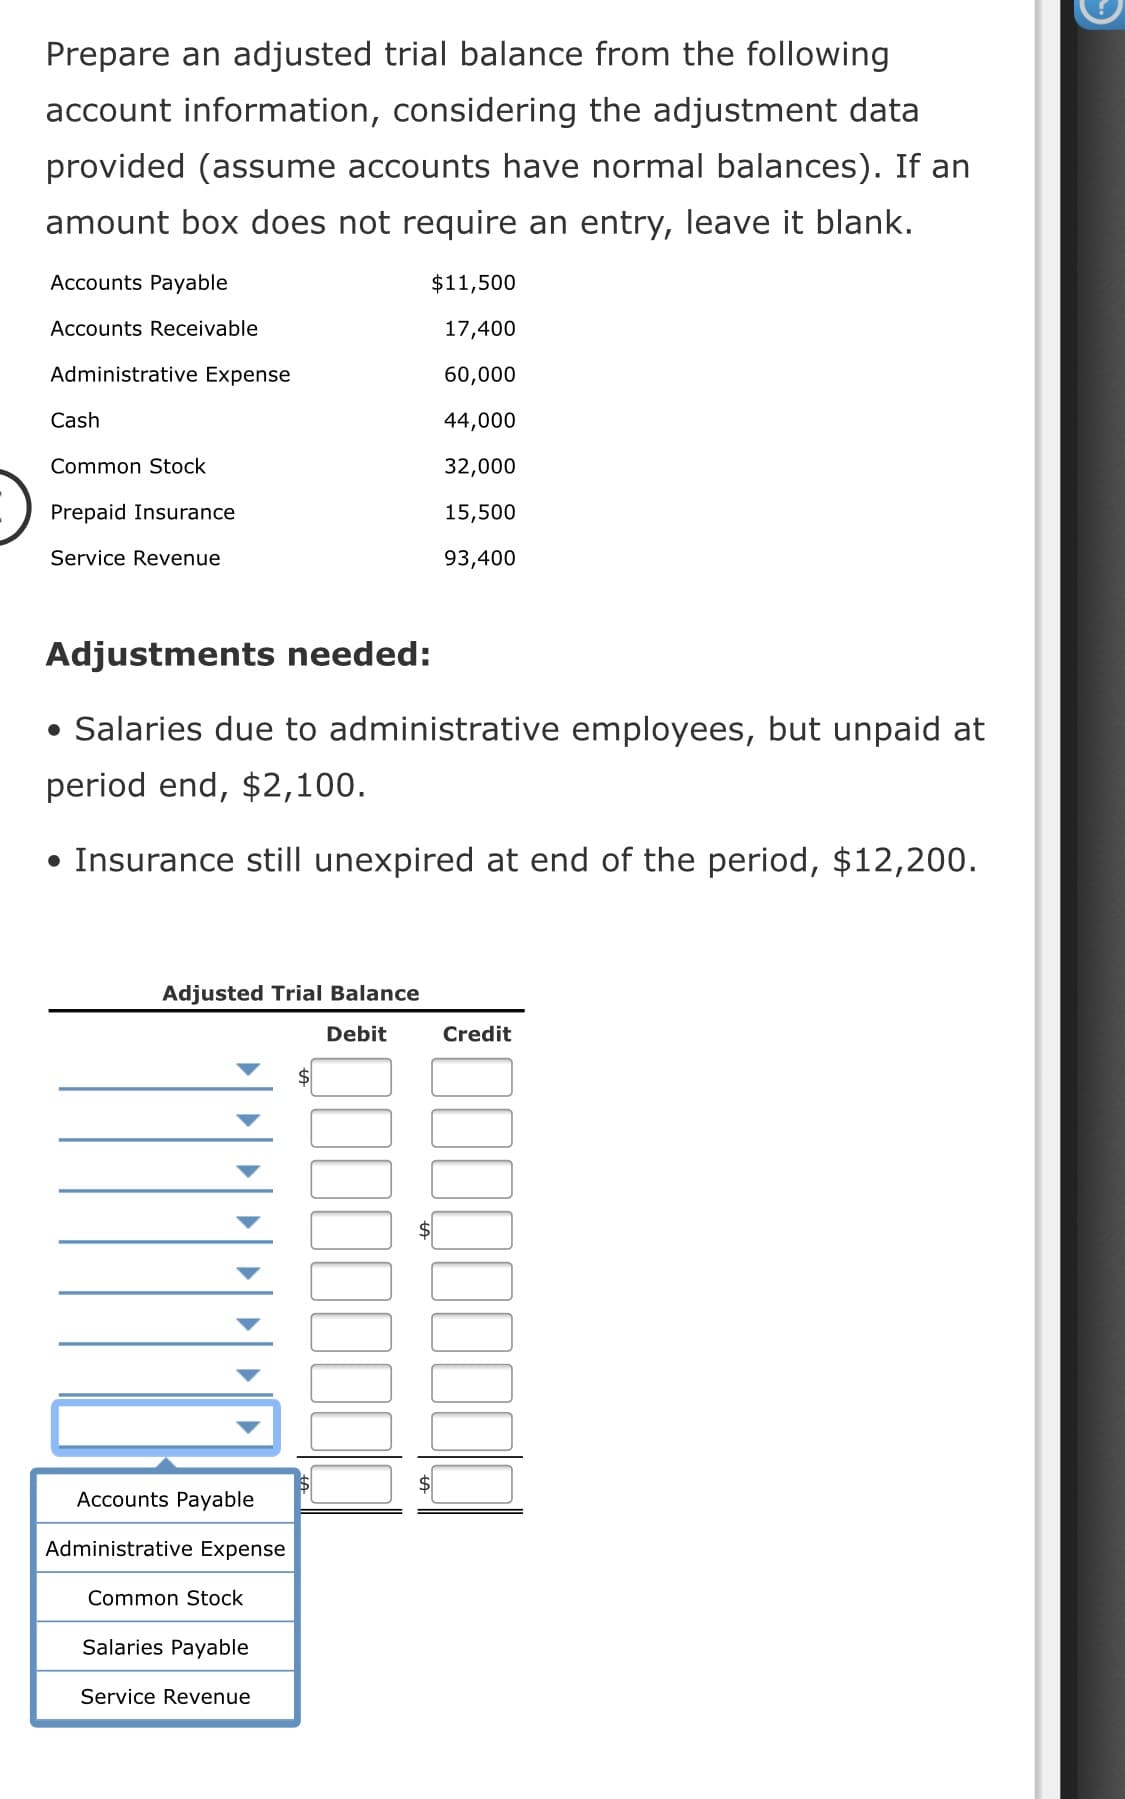 Prepare an adjusted trial balance from the following
account information, considering the adjustment data
provided (assume accounts have normal balances). If an
amount box does not require an entry, leave it blank.
Accounts Payable
$11,500
Accounts Receivable
17,400
Administrative Expense
60,000
Cash
44,000
Common Stock
32,000
Prepaid Insurance
15,500
Service Revenue
93,400
Adjustments needed:
• Salaries due to administrative employees, but unpaid at
period end, $2,100.
• Insurance still unexpired at end of the period, $12,200.
Adjusted Trial Balance
Debit
Credit
%$4
Accounts Payable
Administrative Expense
Common Stock
Salaries Payable
Service Revenue
